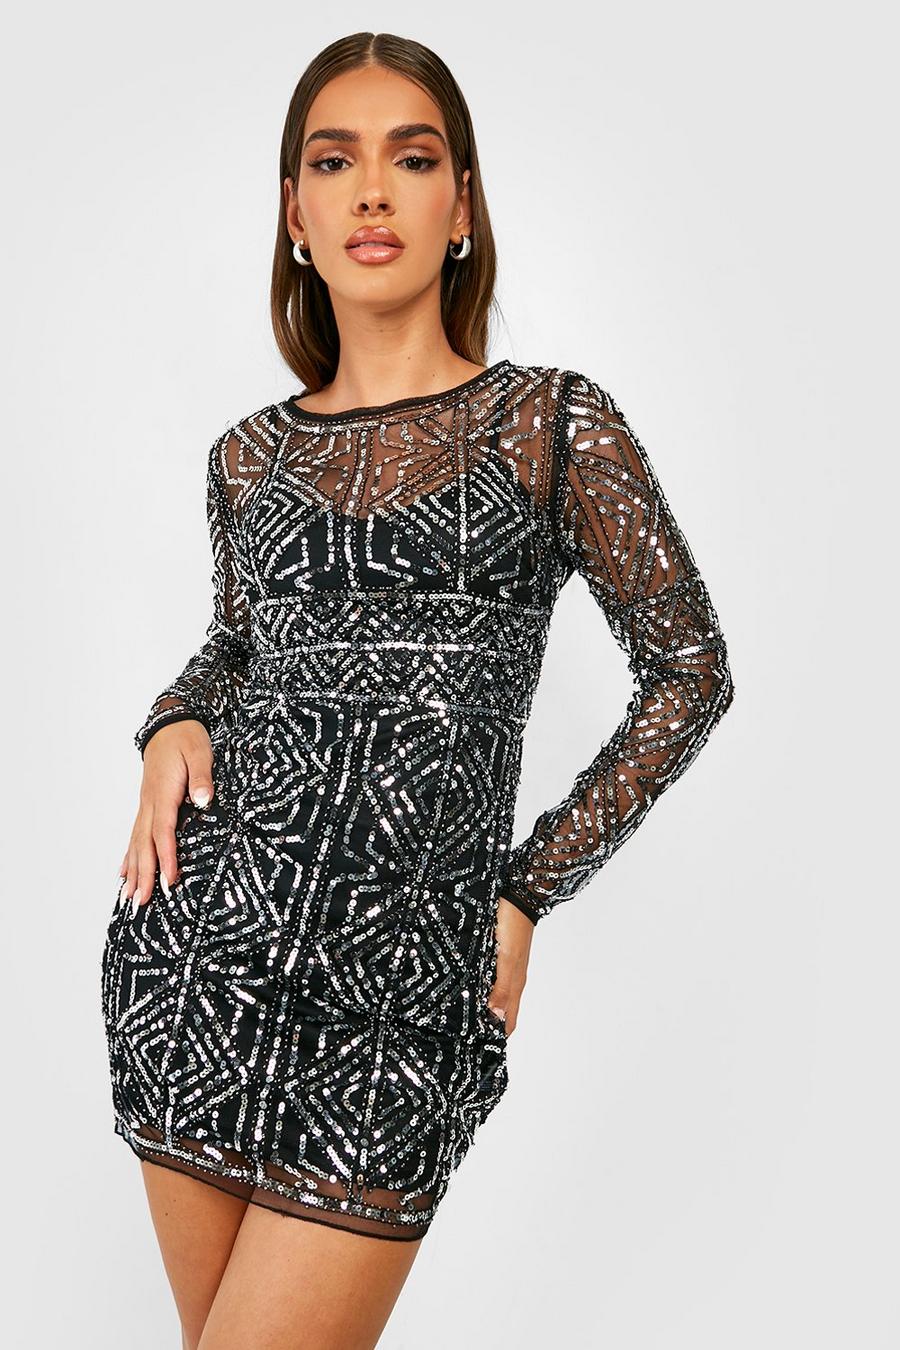 Silver Boutique Embellished Bodycon Party Dress